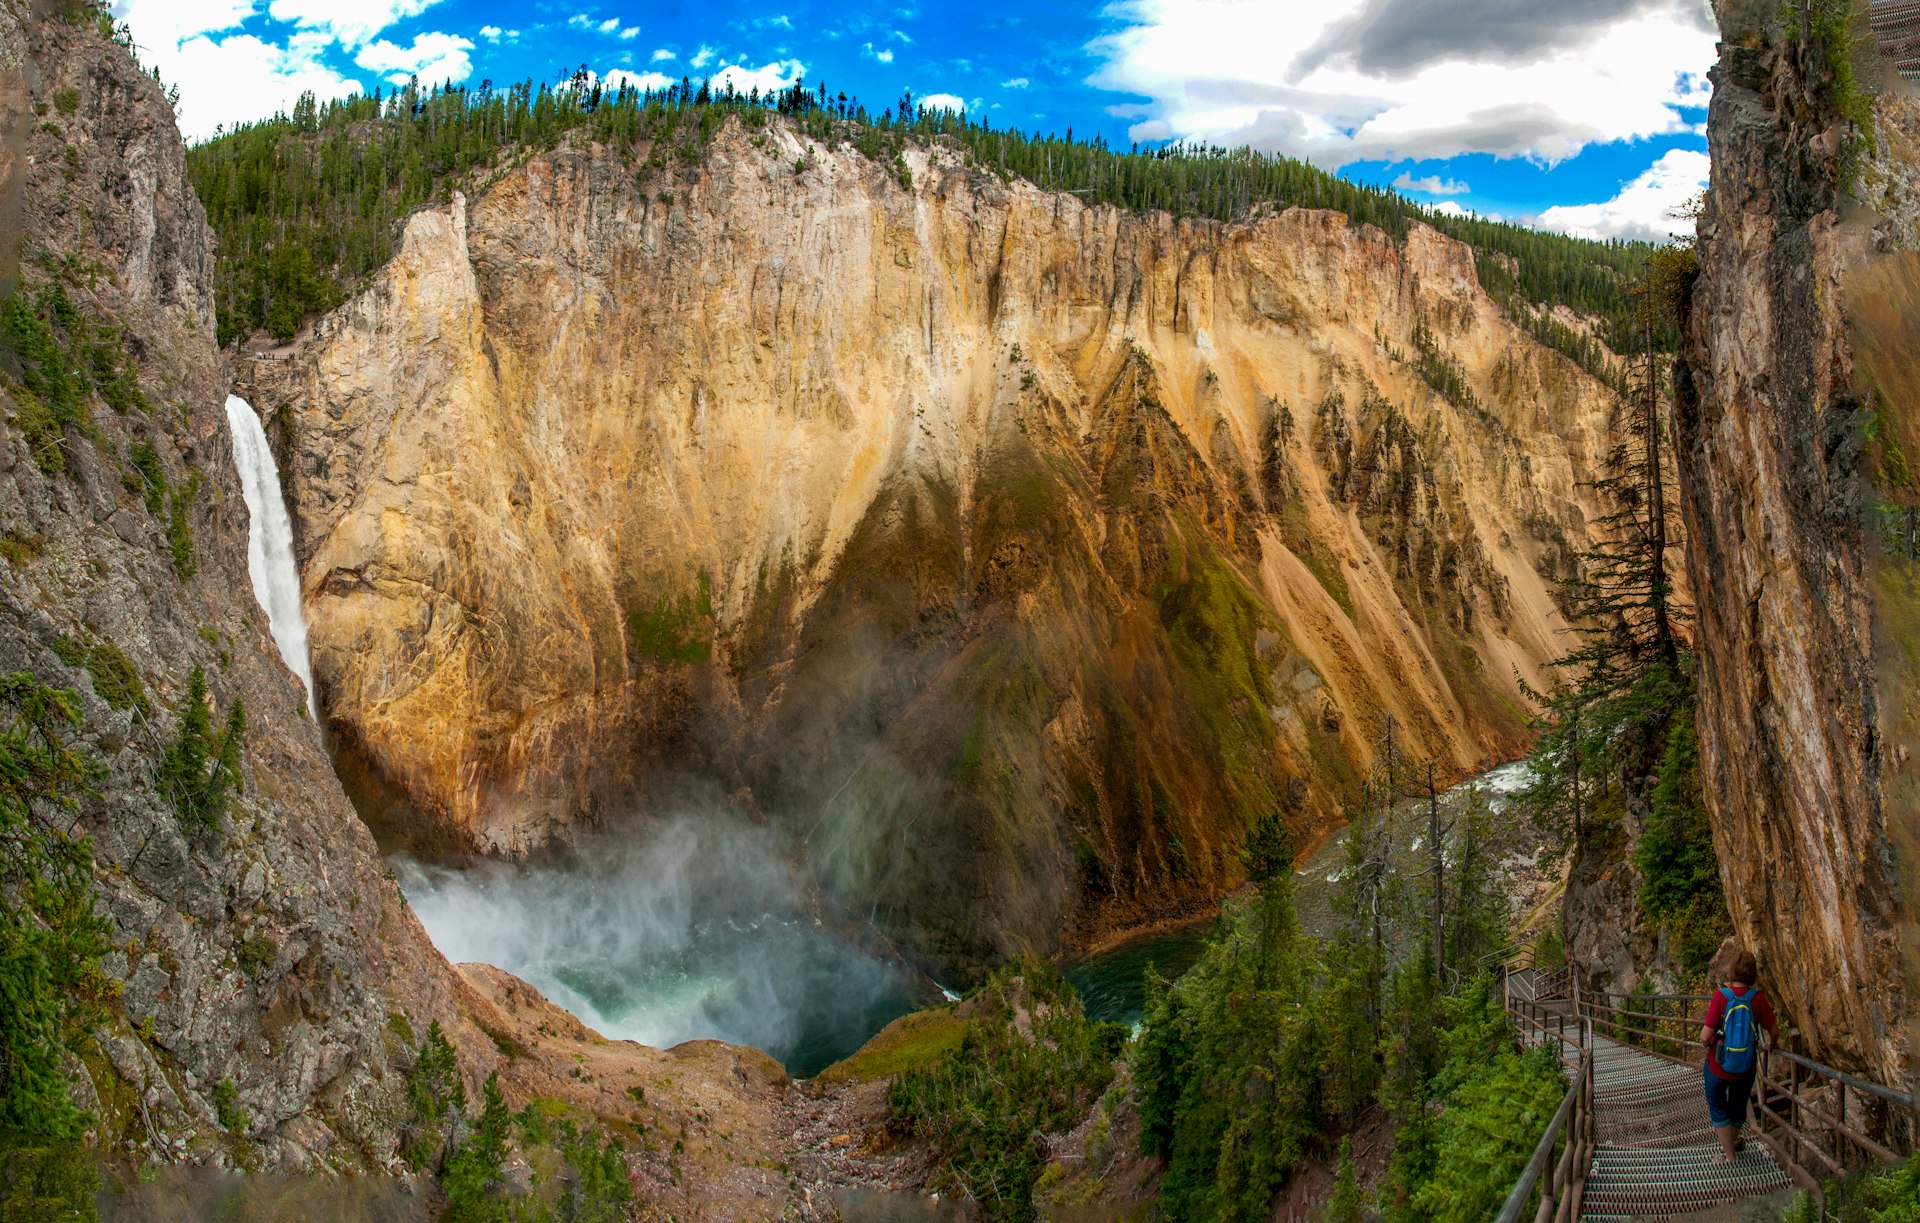 Panoramic view of the Lower Falls in Yellowstone National Park